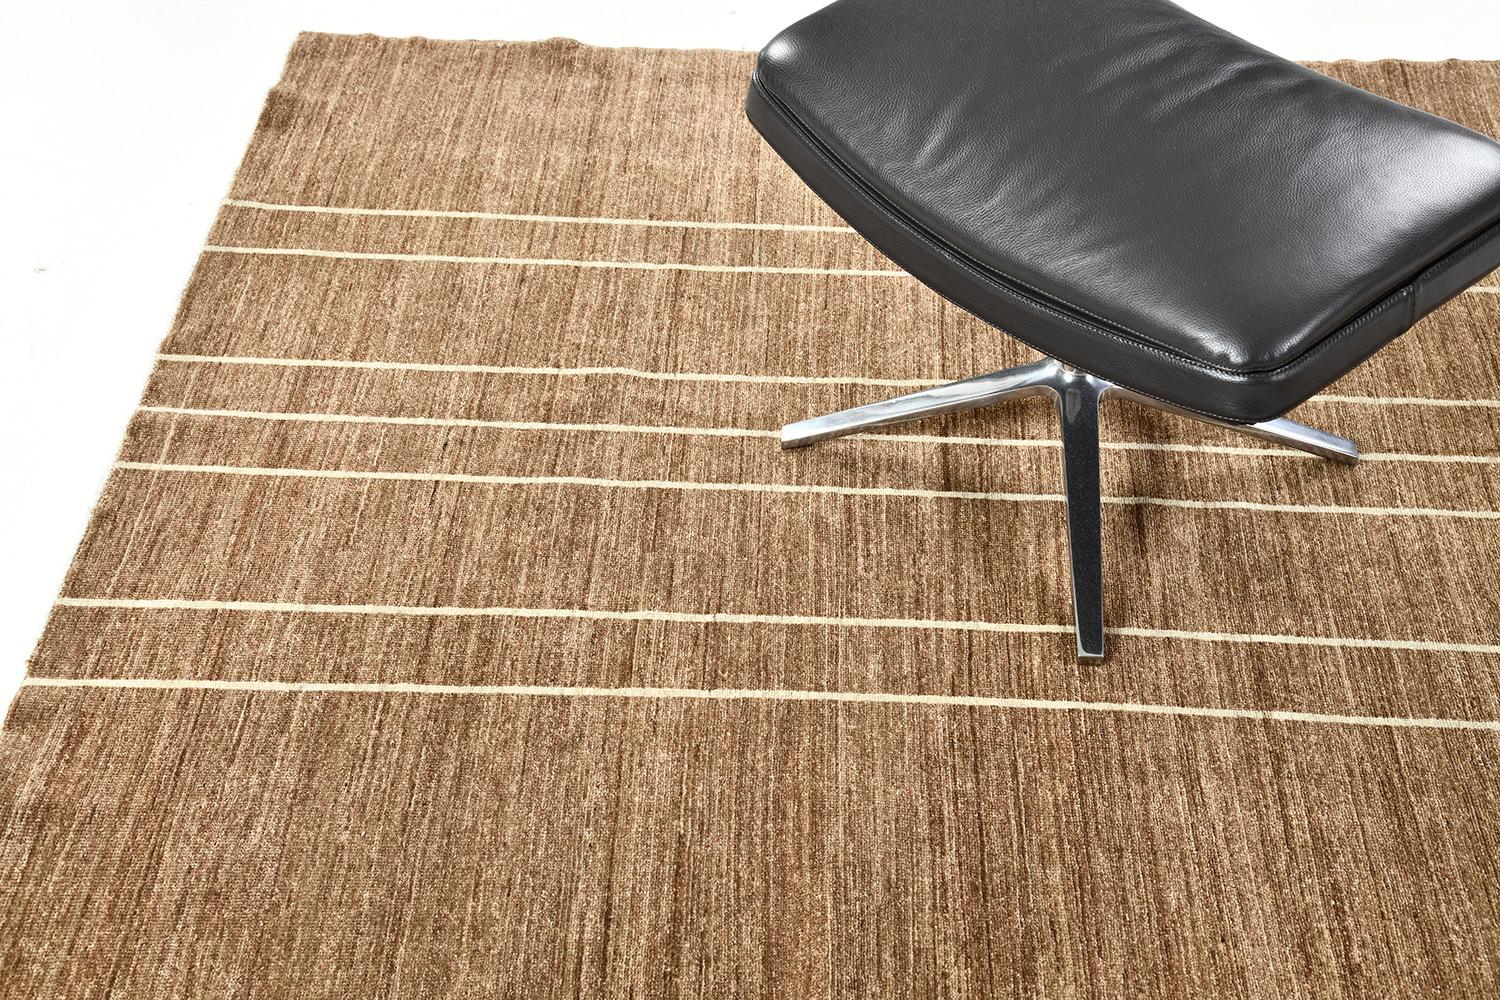 An outstanding creation of Modern Mondrian rug that elegantly establishes the exceptional intricacy through a design of light outlines to a horizontal stroke of umber brown. With its versatility, this masterful piece made from hand-spun wool would